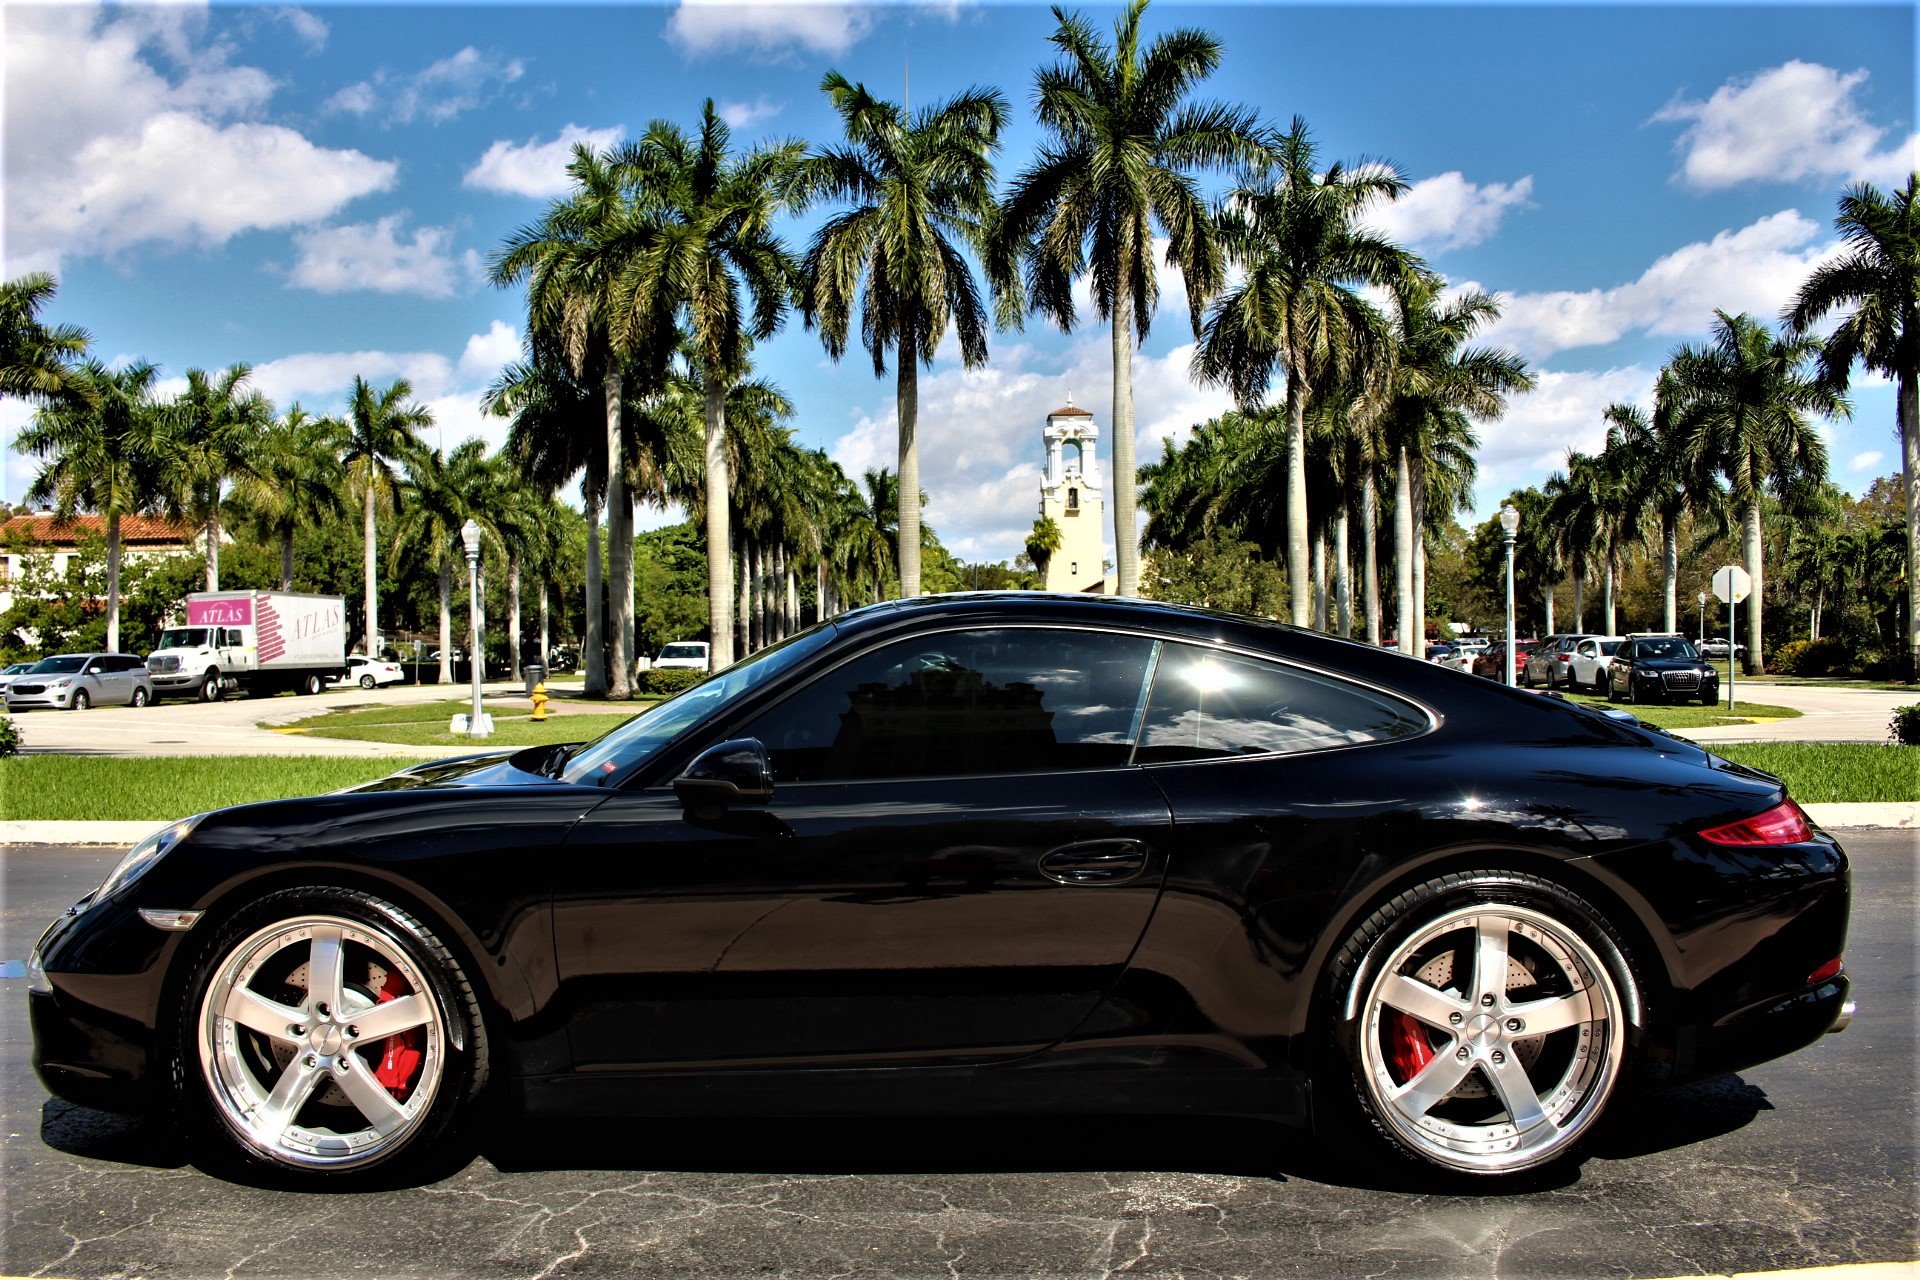 Used 2012 Porsche 911 Carrera S for sale Sold at The Gables Sports Cars in Miami FL 33146 3